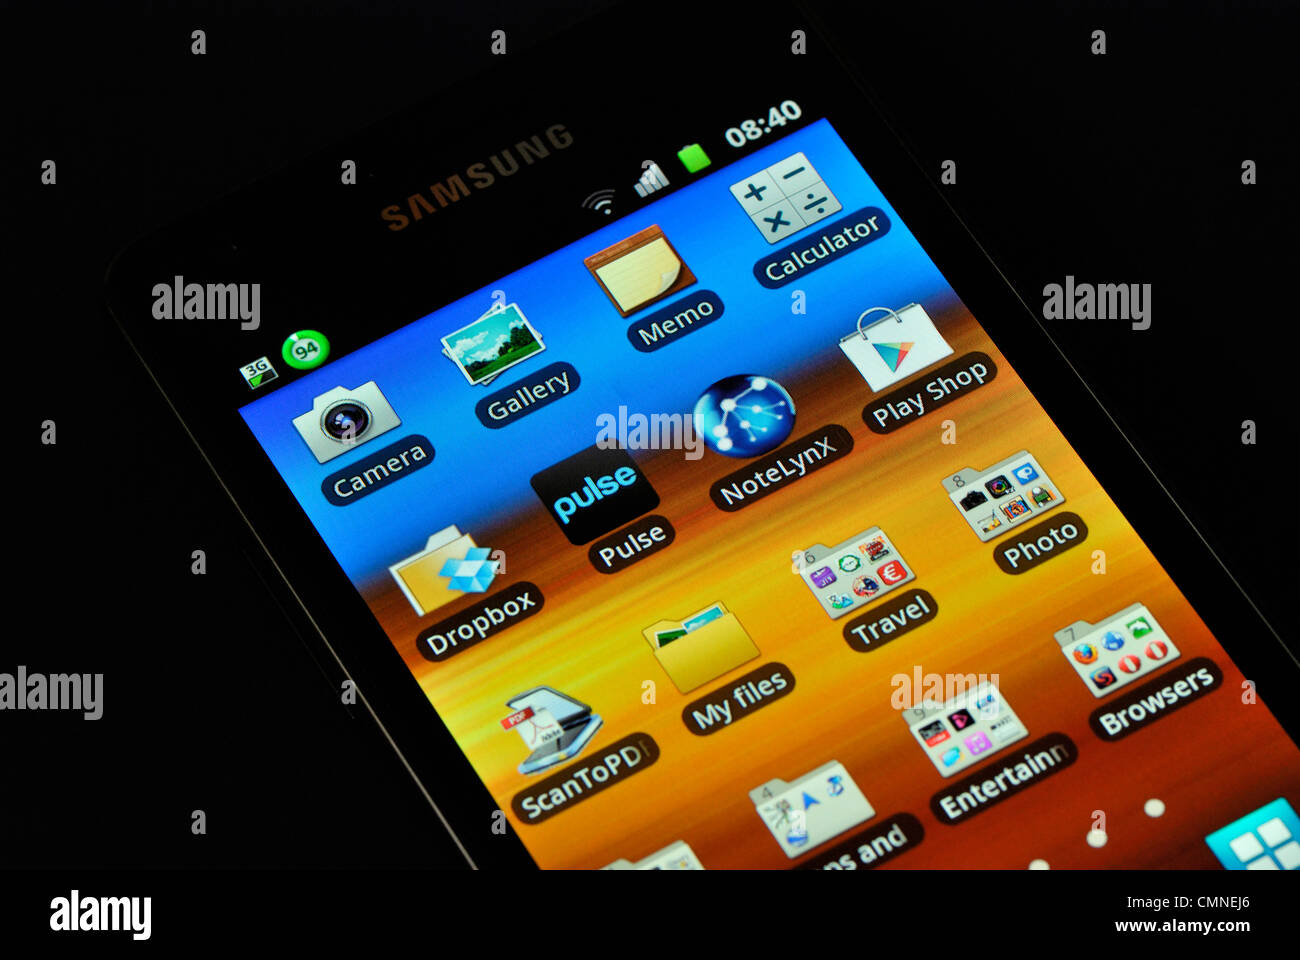 Mobile phone apps on an Android smartphone Stock Photo